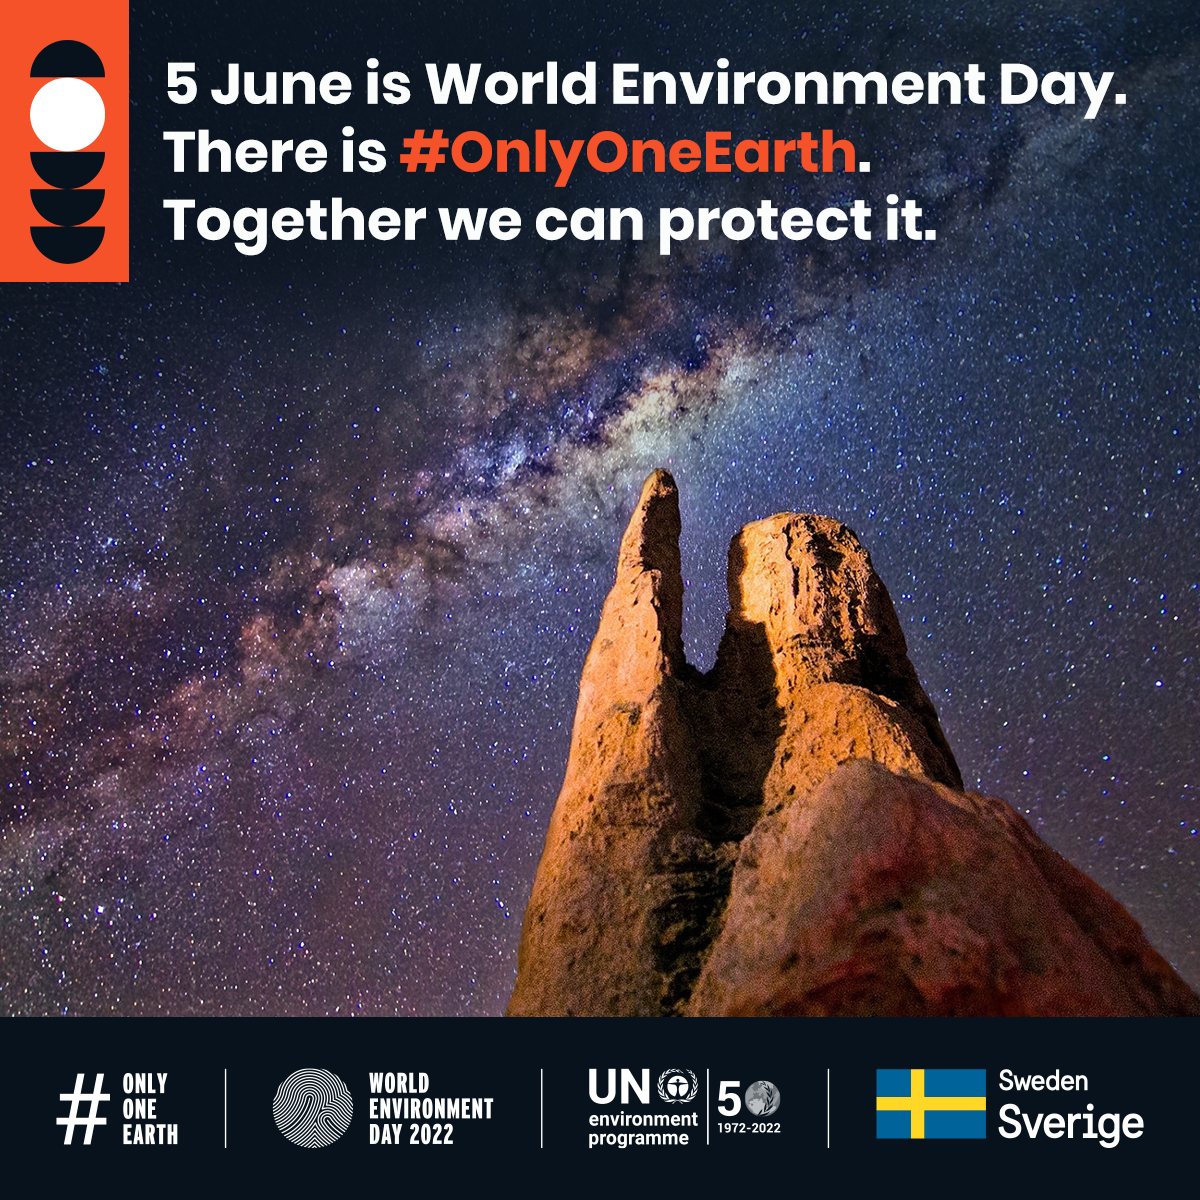 World Environment Day image, featuring the text 'There is only one Earth, together we can protect it'